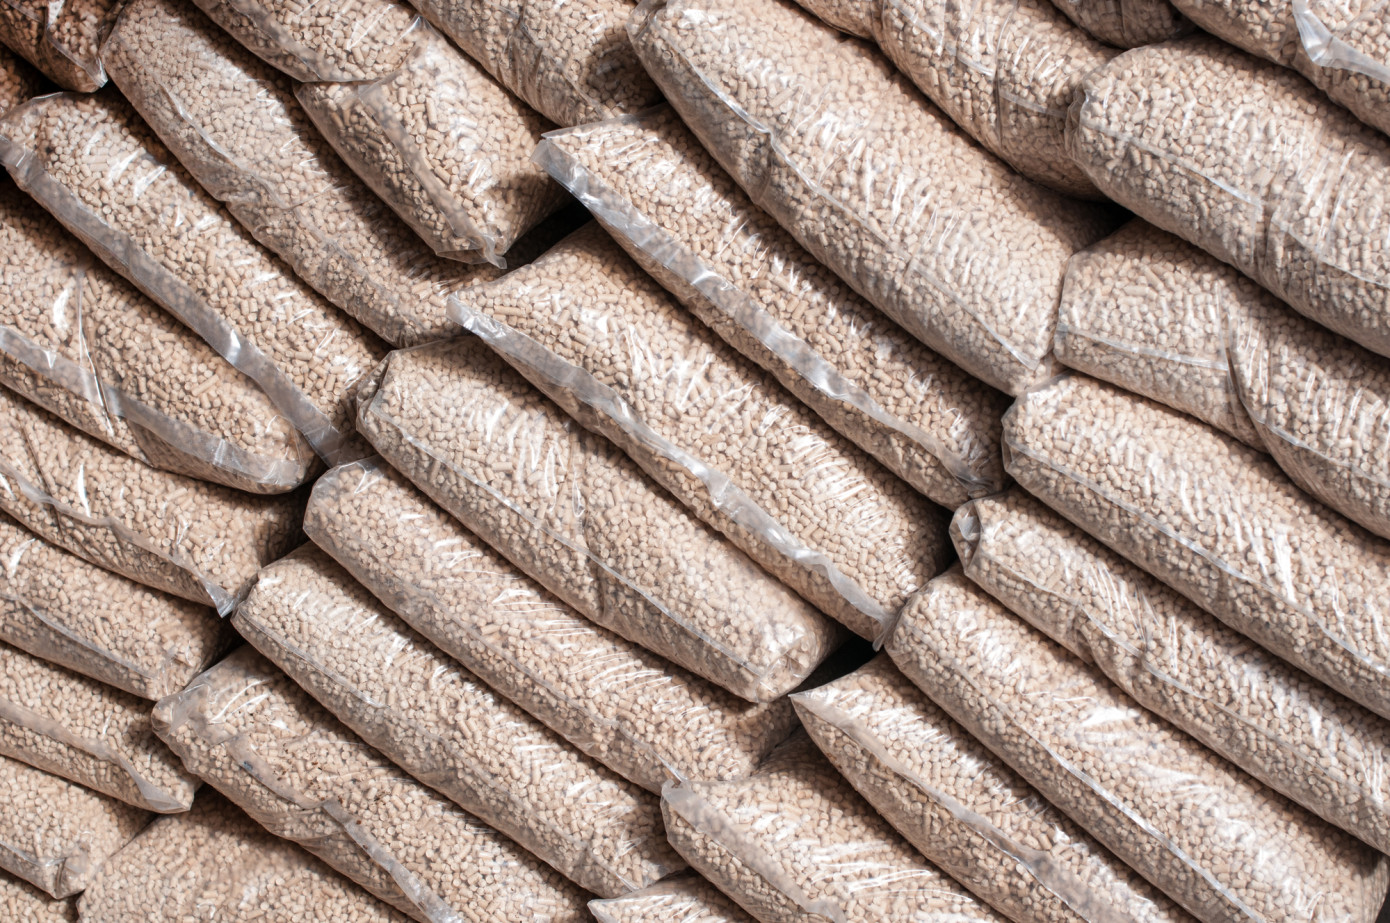 In January, price for wood pellets imported to European Union increases 15%